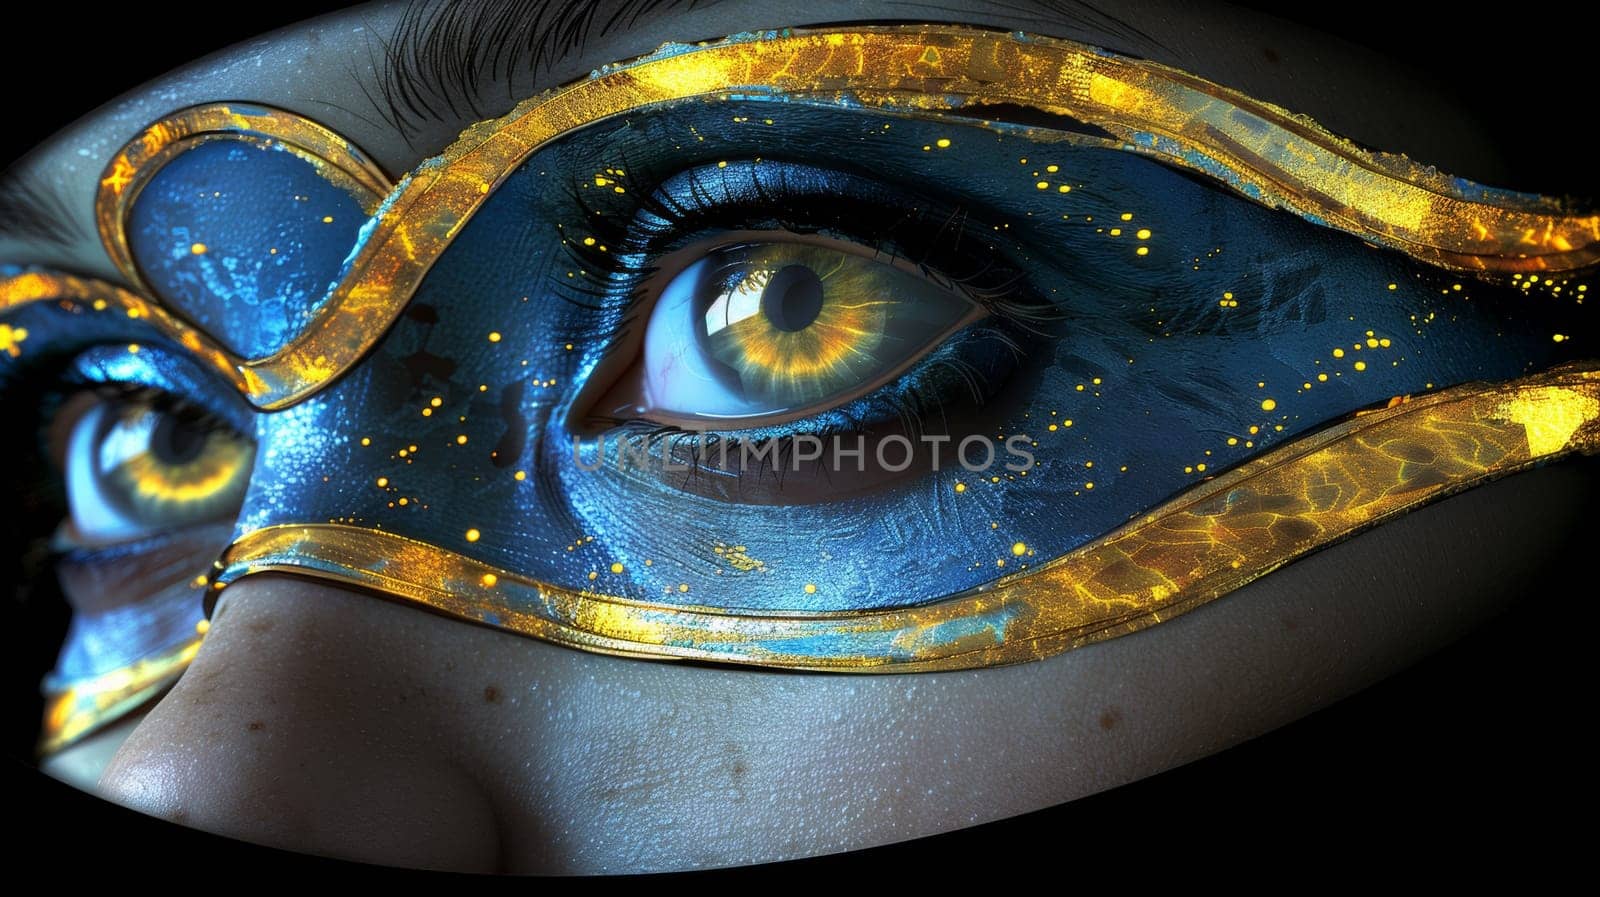 A close up of a woman's face with blue and gold eyes